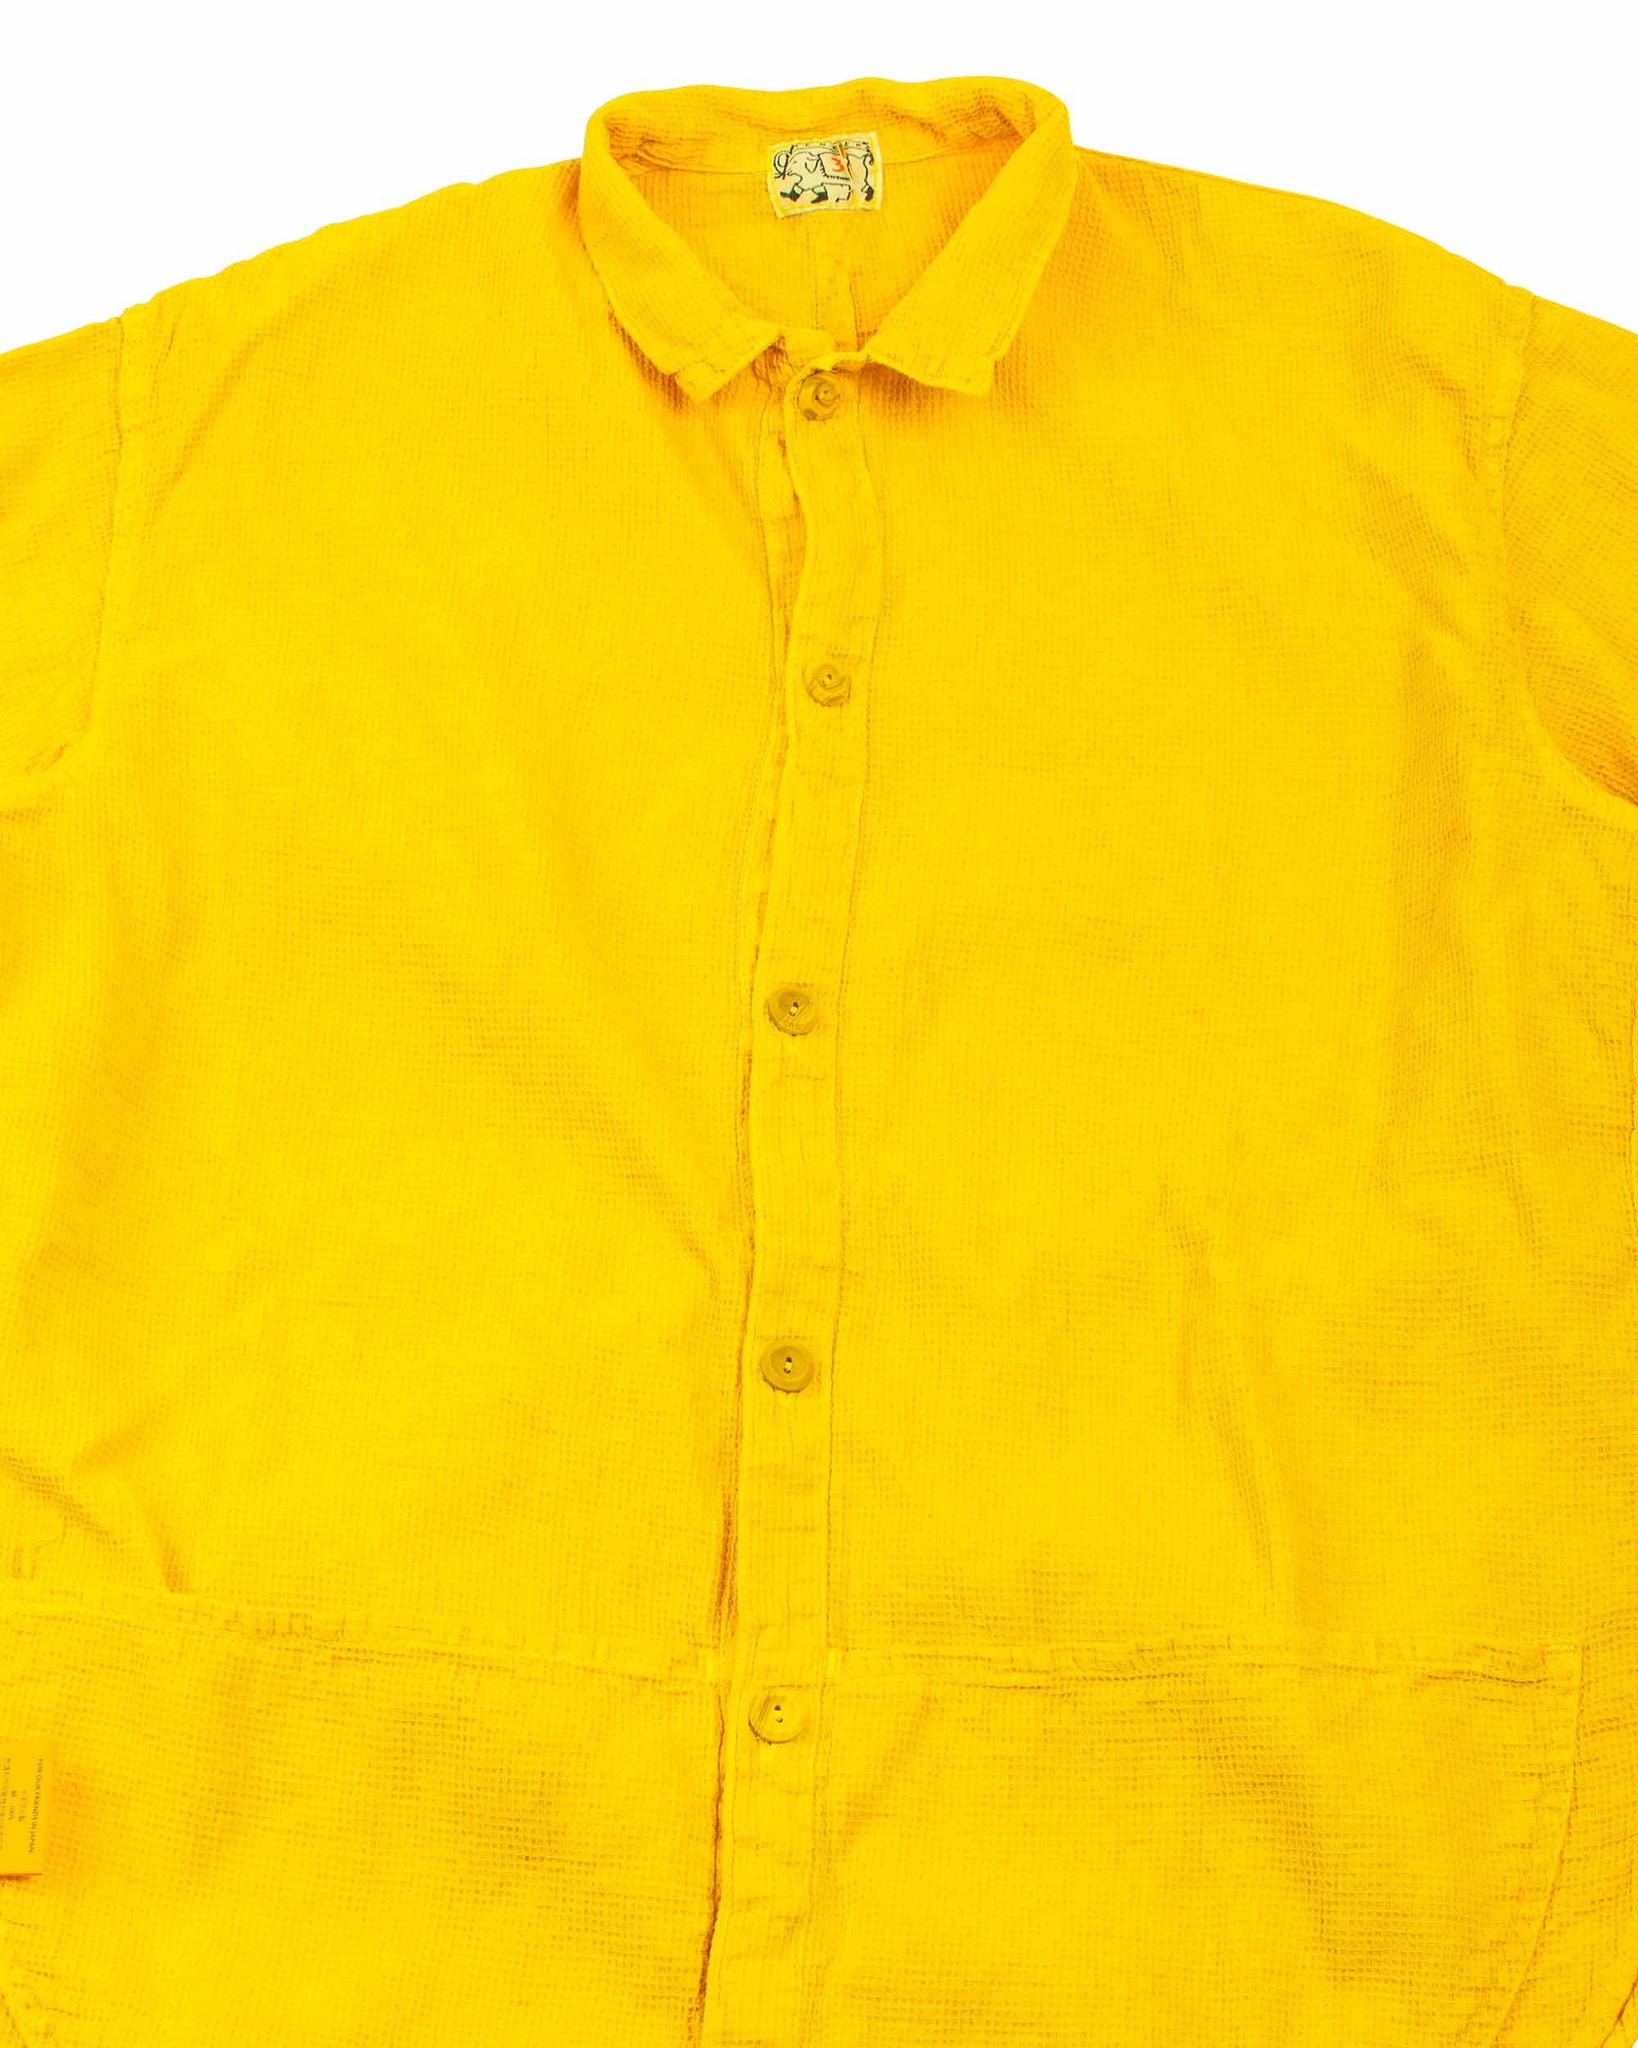 Tender Type 443 Short Sleeve Compass Pocket Shirt Fine Cotton Beekeeper's Cloth Tumeric Dyed Details